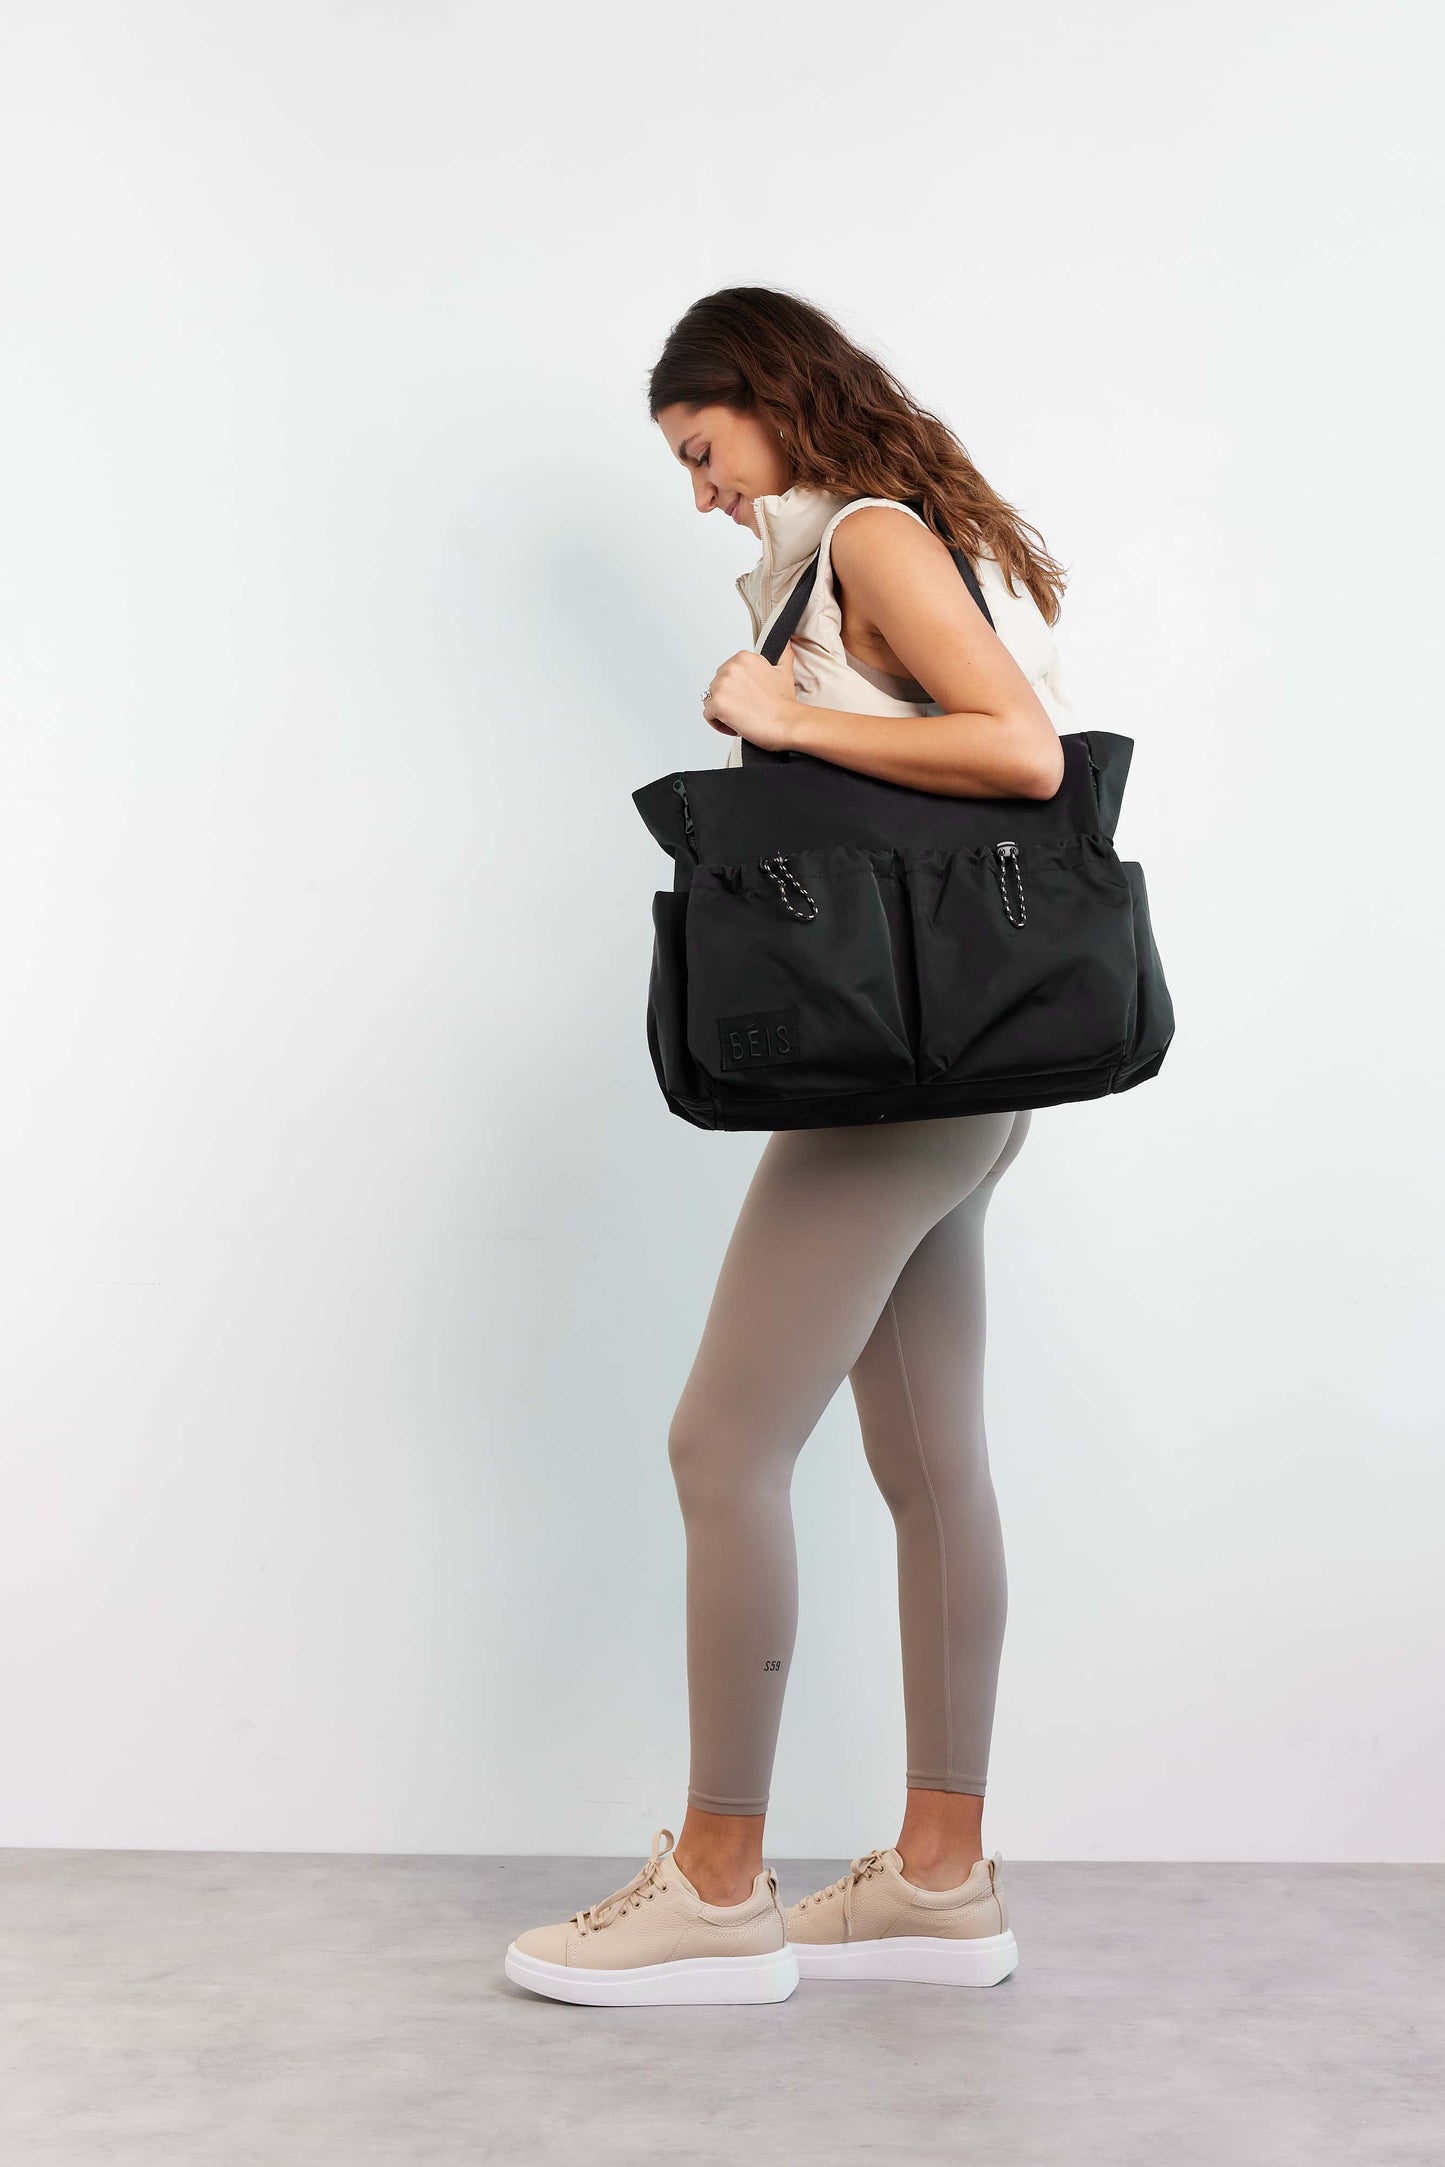 The Sport Carryall in Black